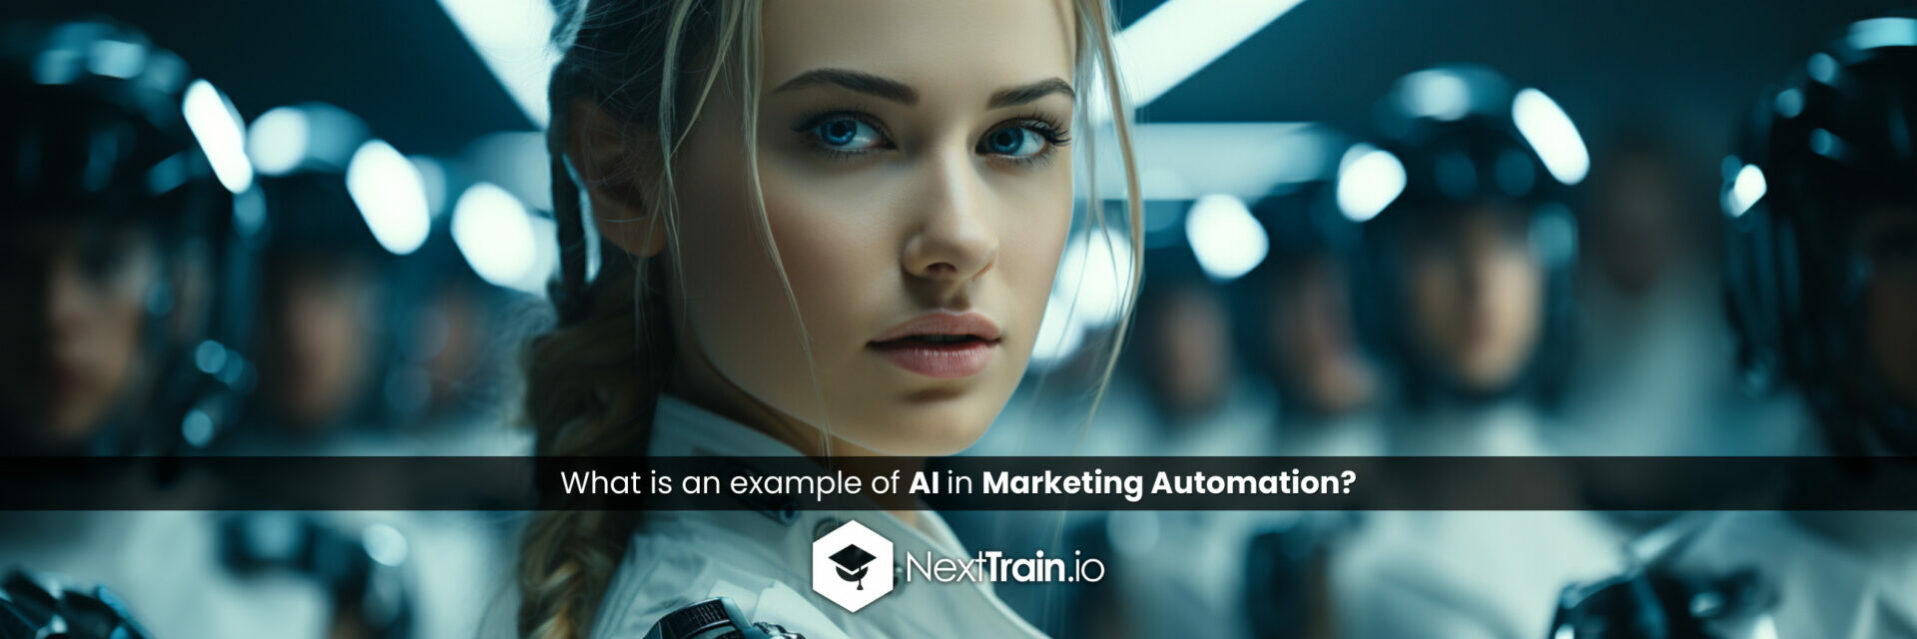 What is an example of AI in Marketing Automation?